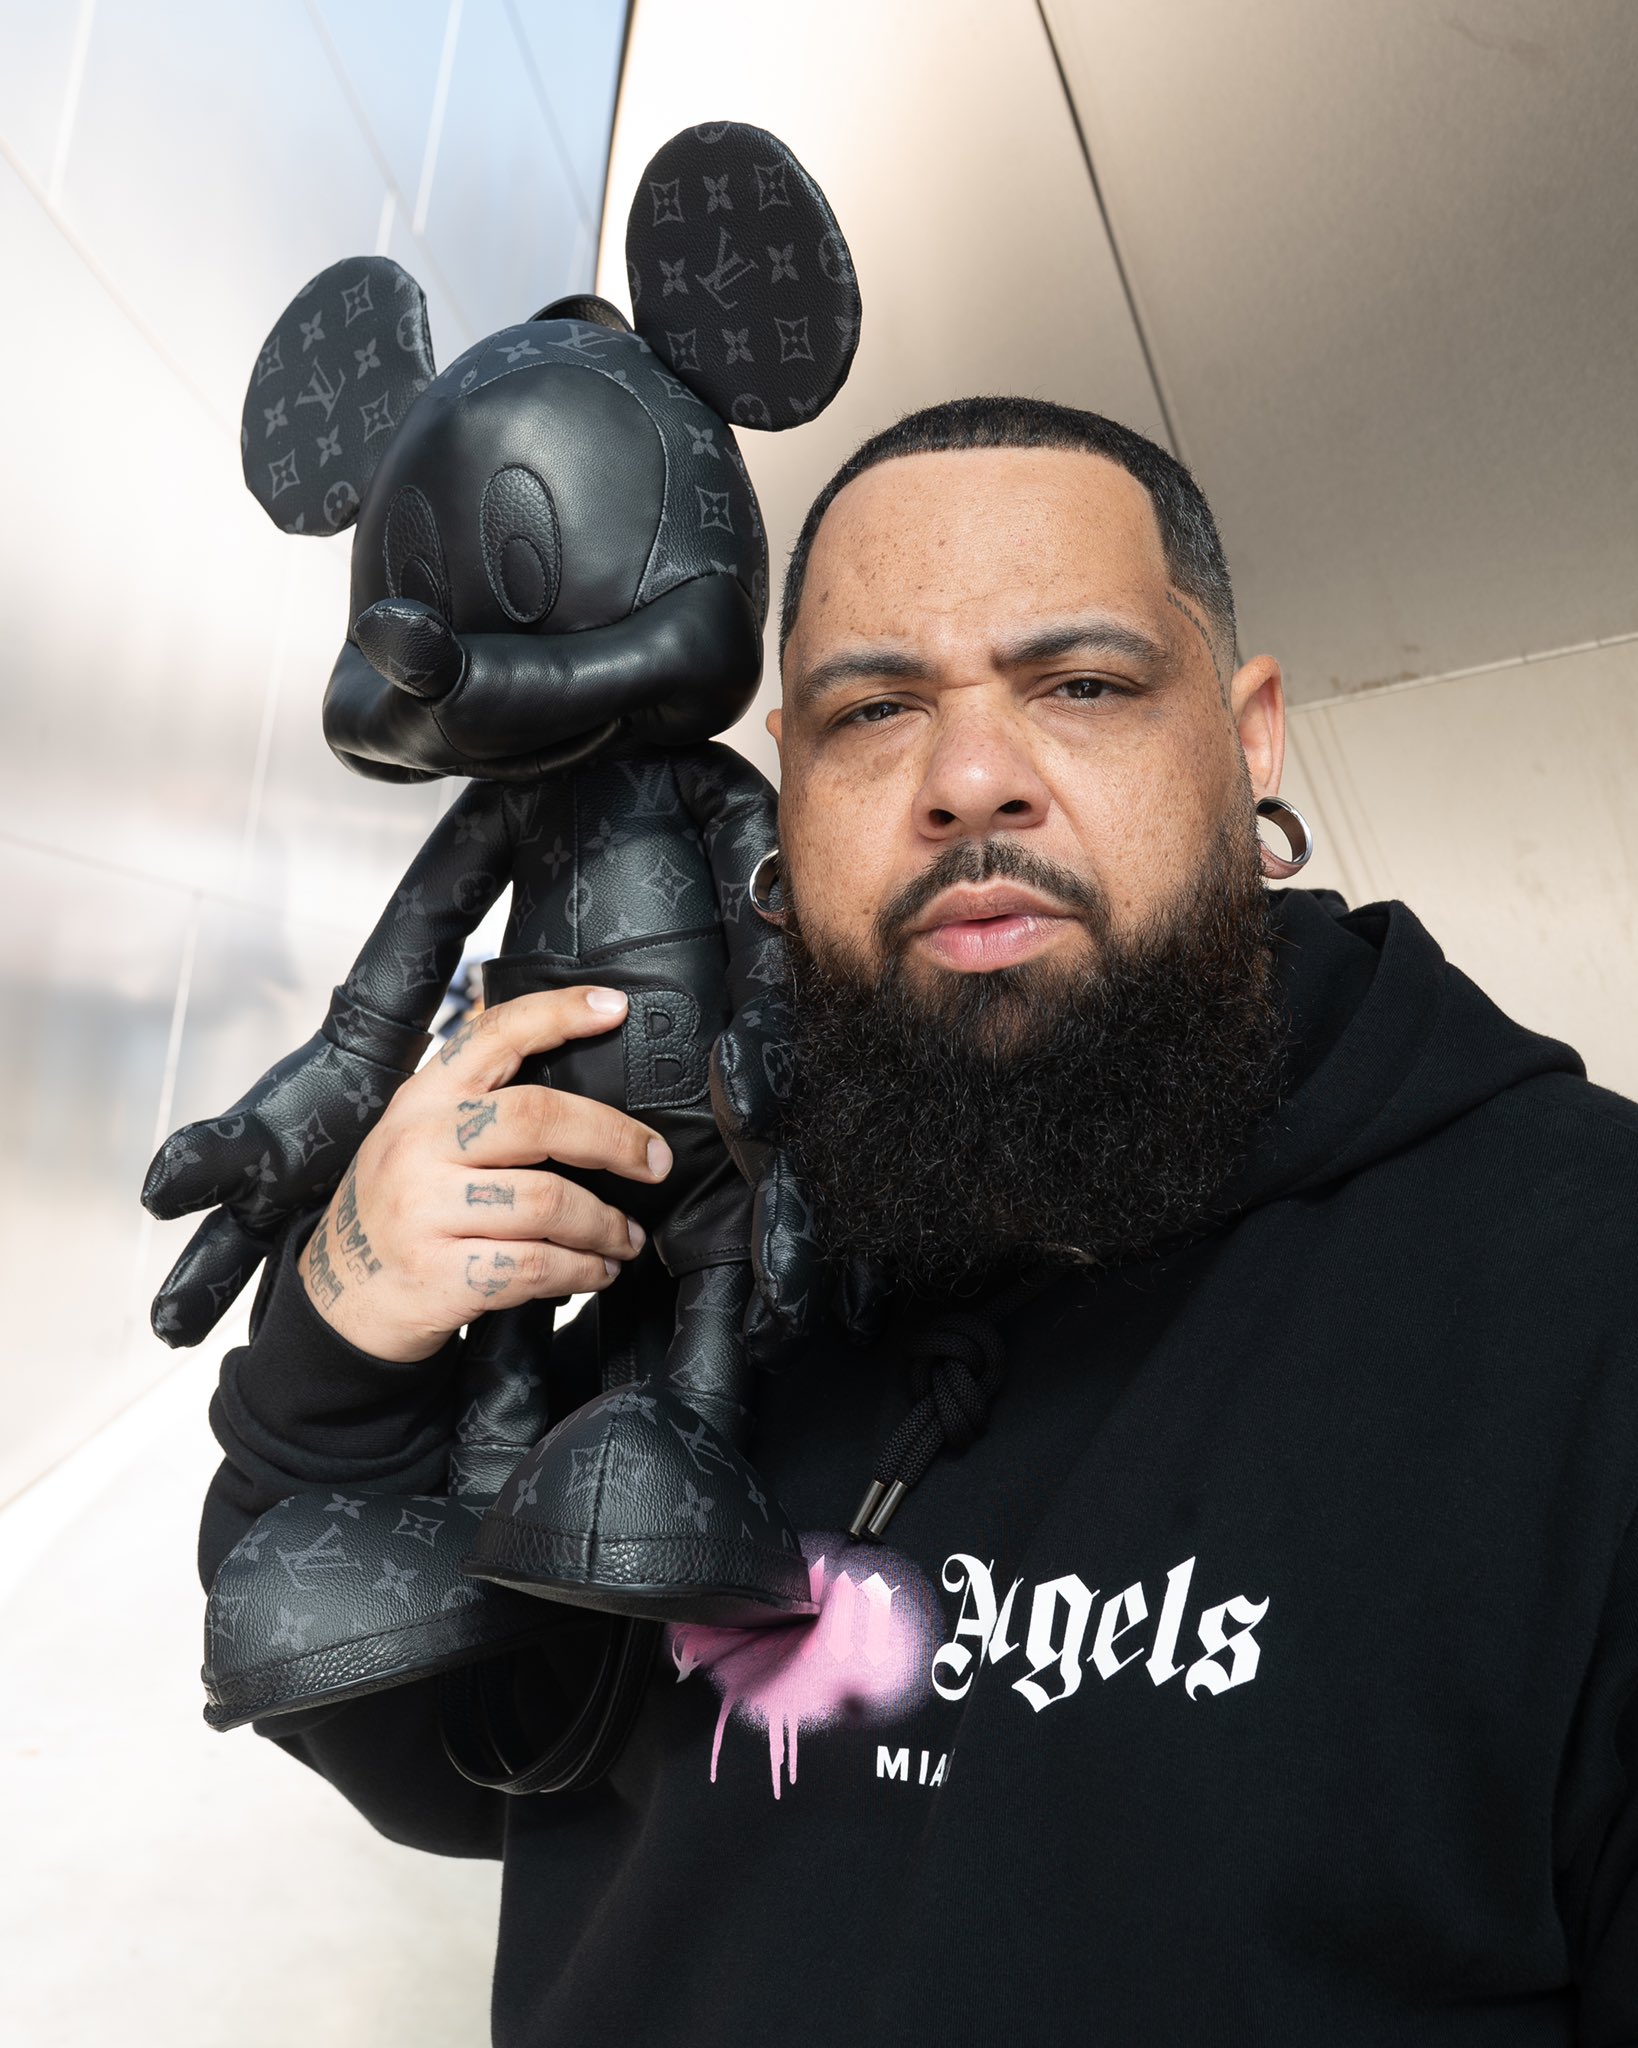 Sheron Barber on X: What are your thoughts on this Mickey Mouse